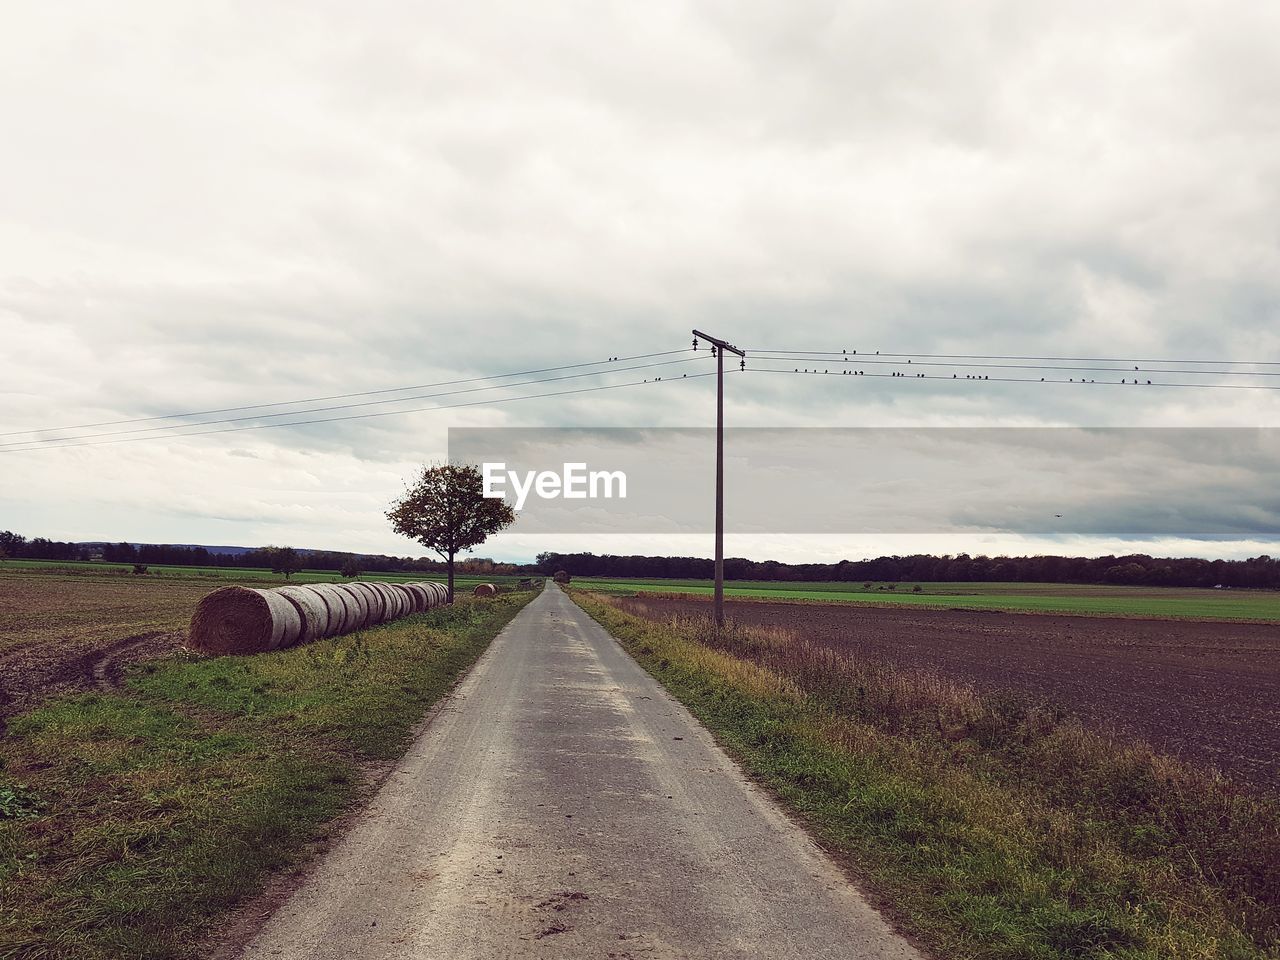 ROAD PASSING THROUGH AGRICULTURAL FIELD AGAINST SKY